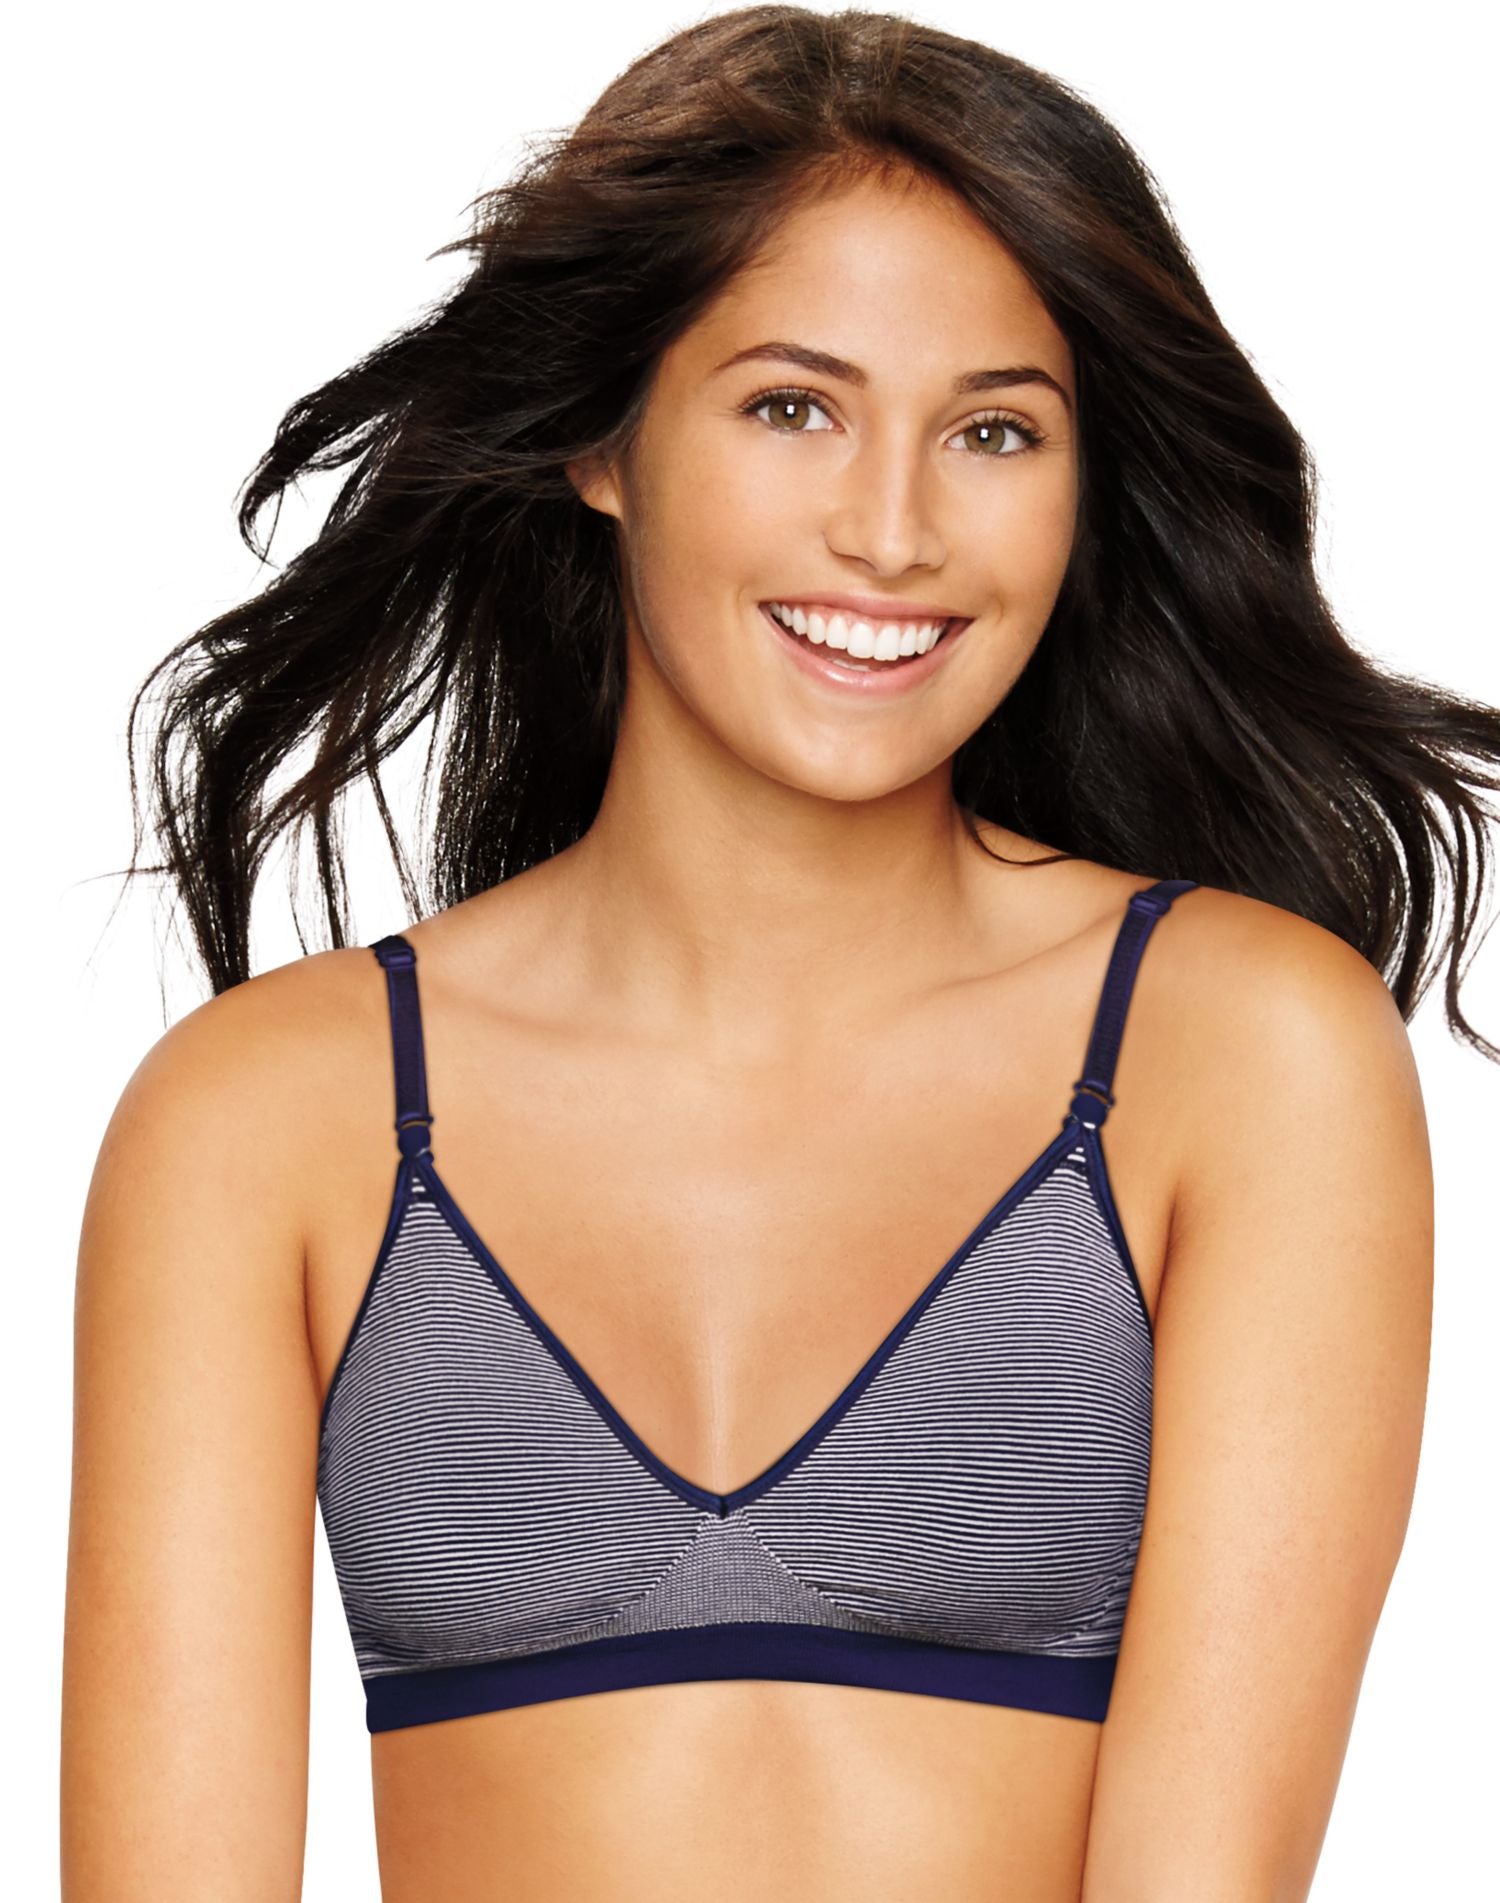 Wireless Bra, Wire-Free Bra for Women Comfortable with Support